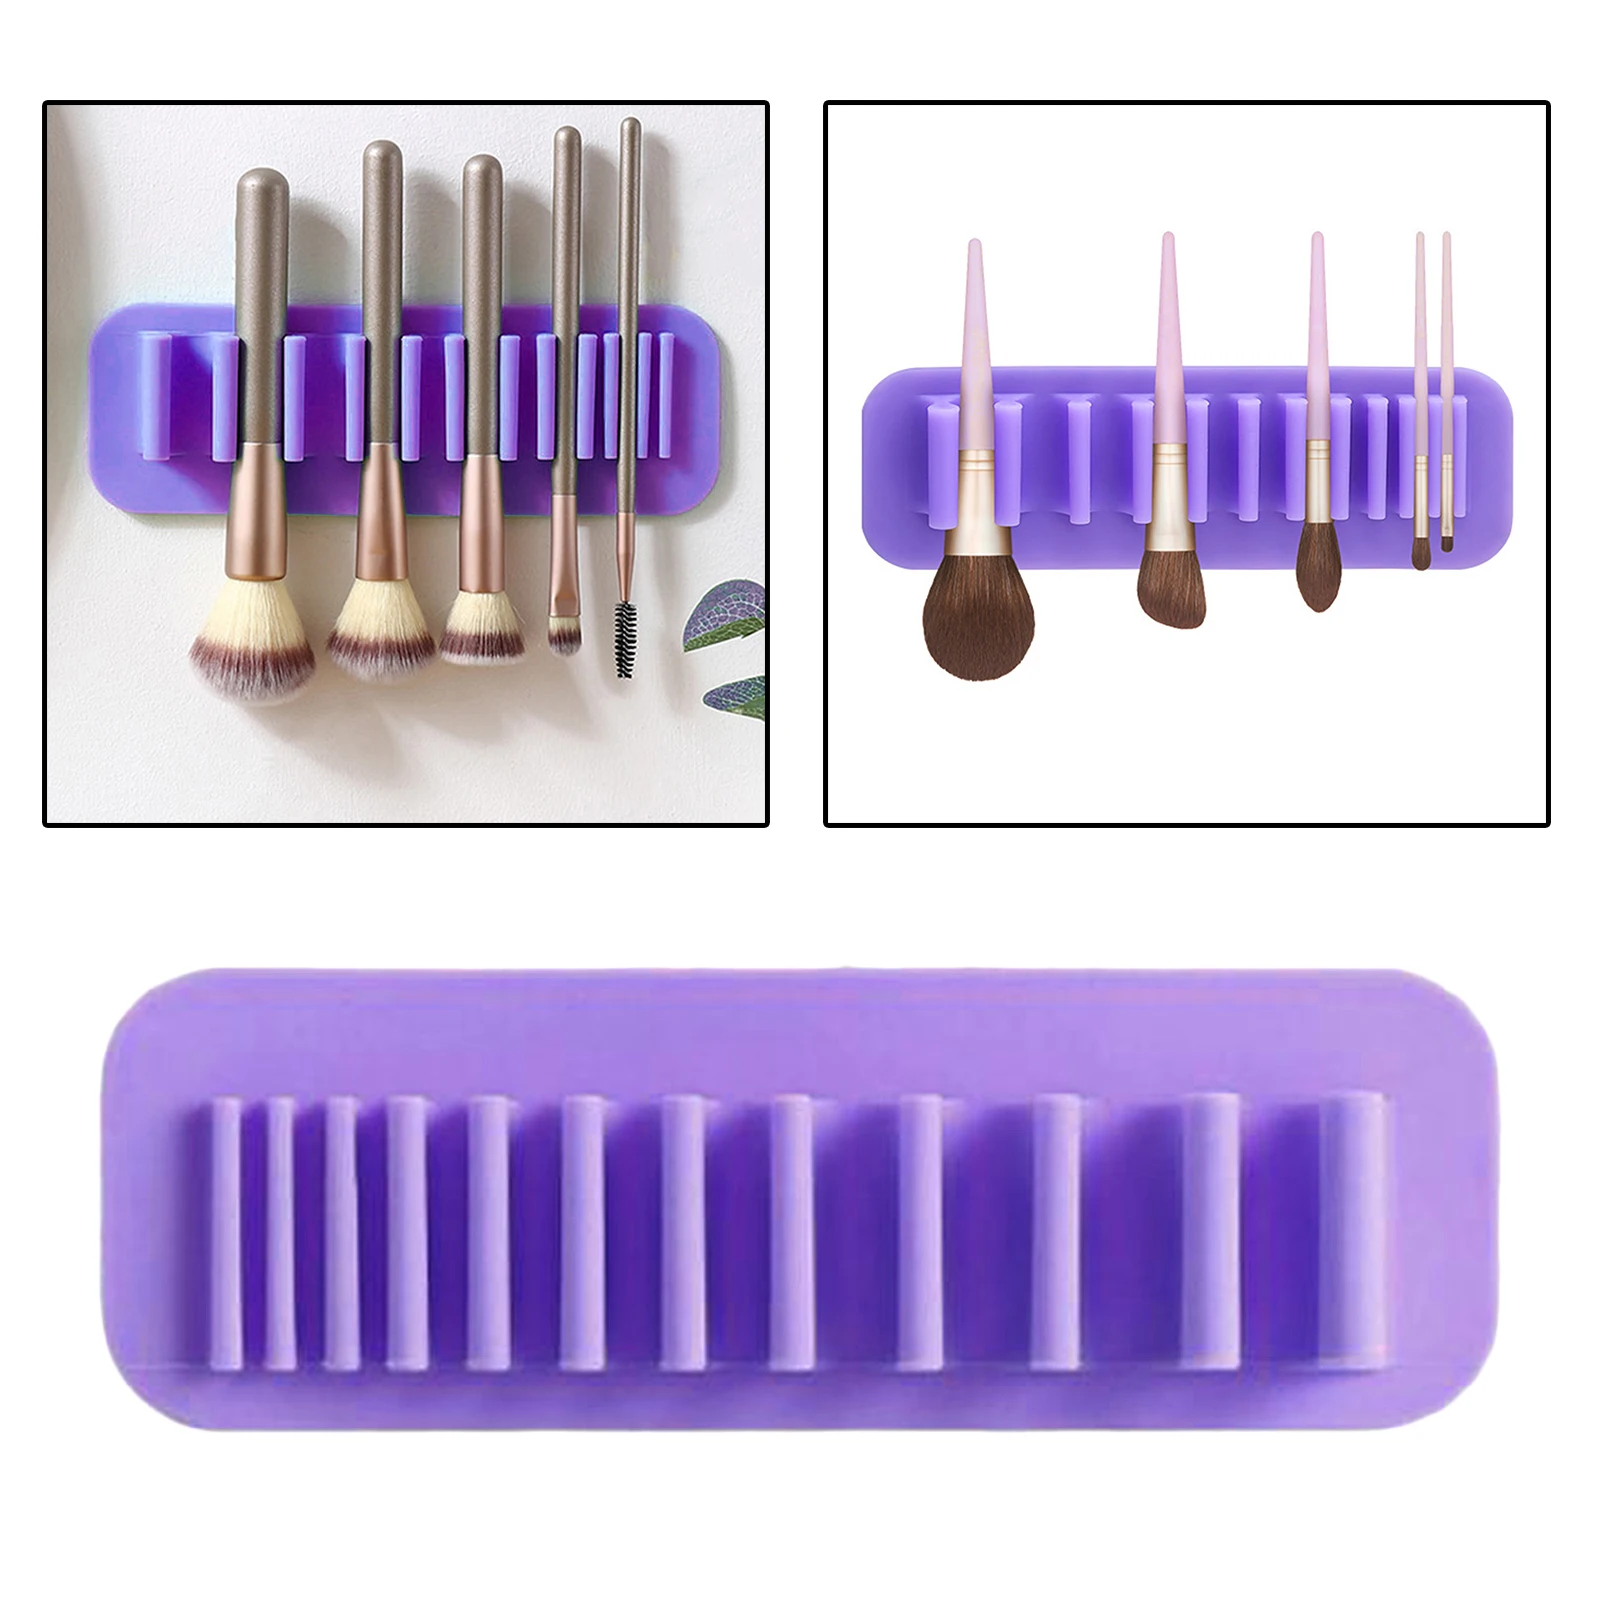 Silicone Wall Mount Makeup Brush Holder Storage Stand Hanger Case Organizer Thin Paint Brush Drying Art Rack Suction Cup